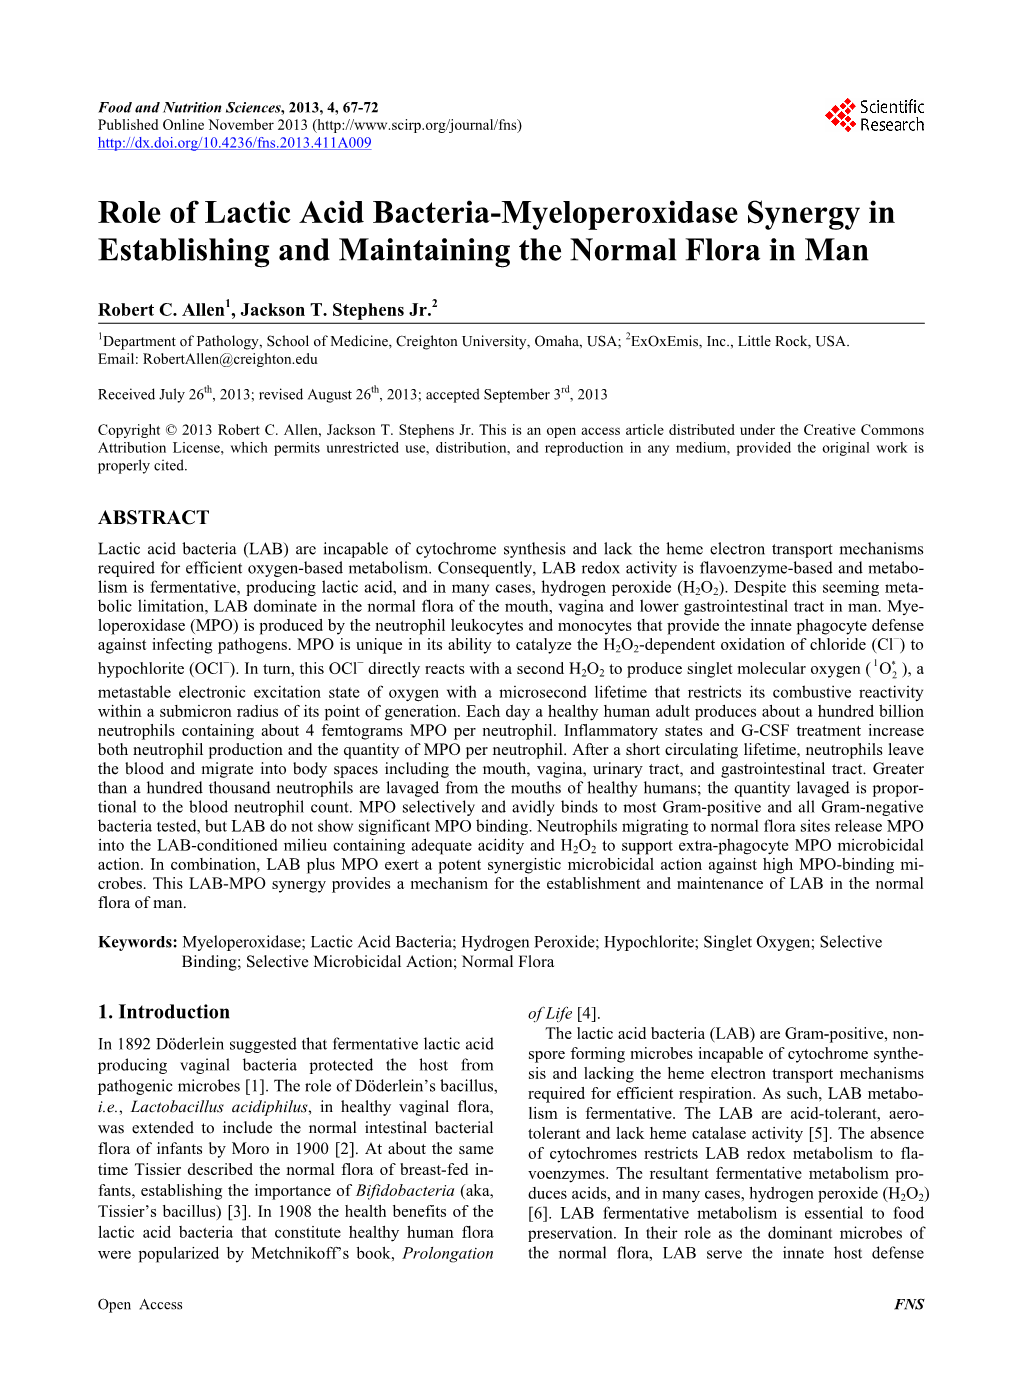 Role of Lactic Acid Bacteria-Myeloperoxidase Synergy in Establishing and Maintaining the Normal Flora in Man